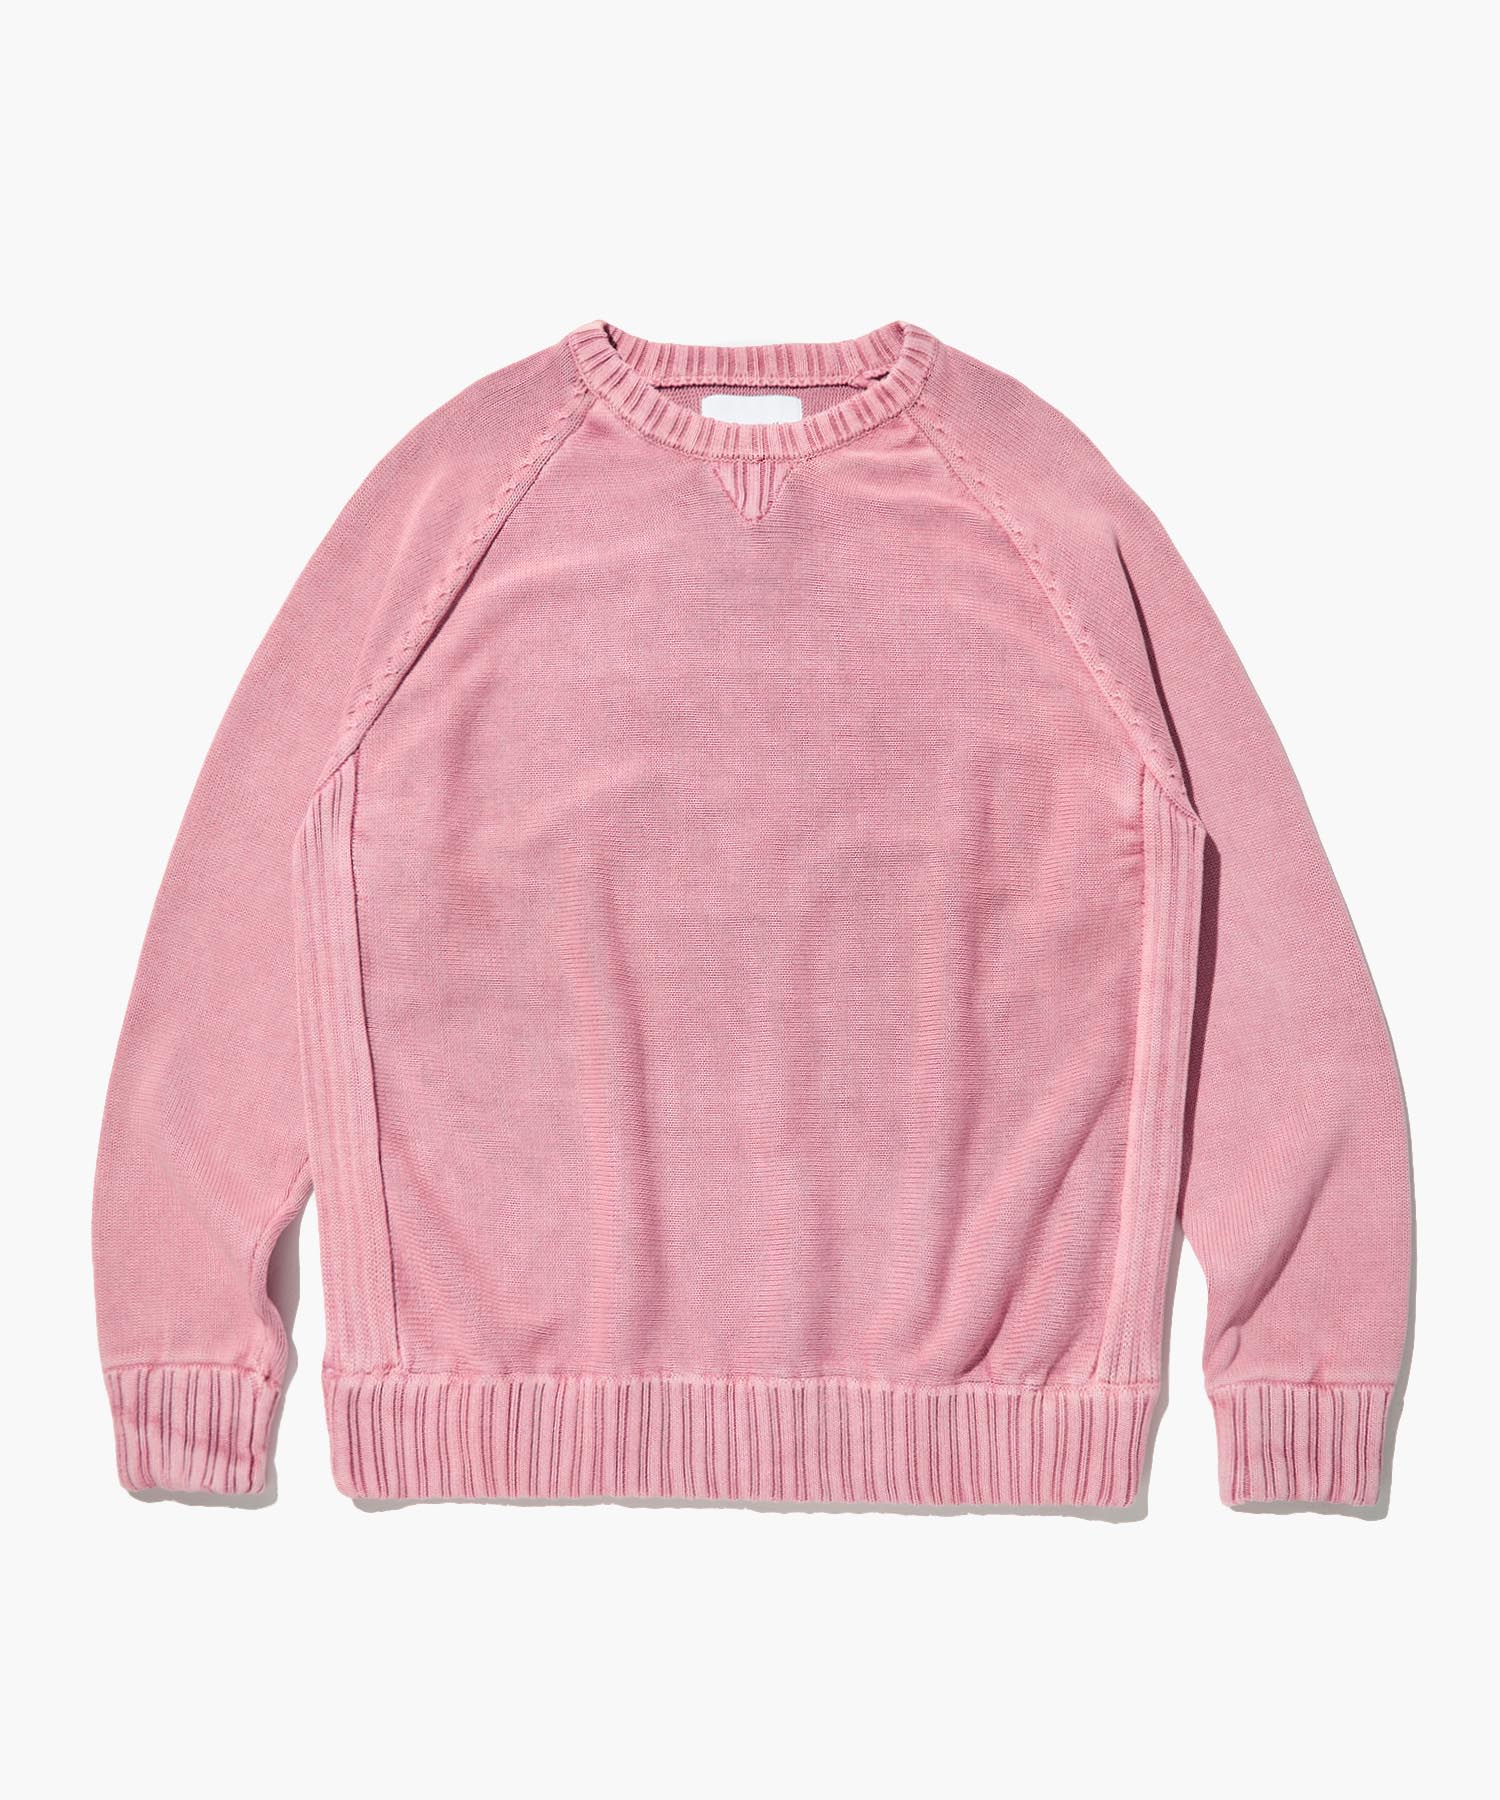 REVERSE DYING KNIT_PINK